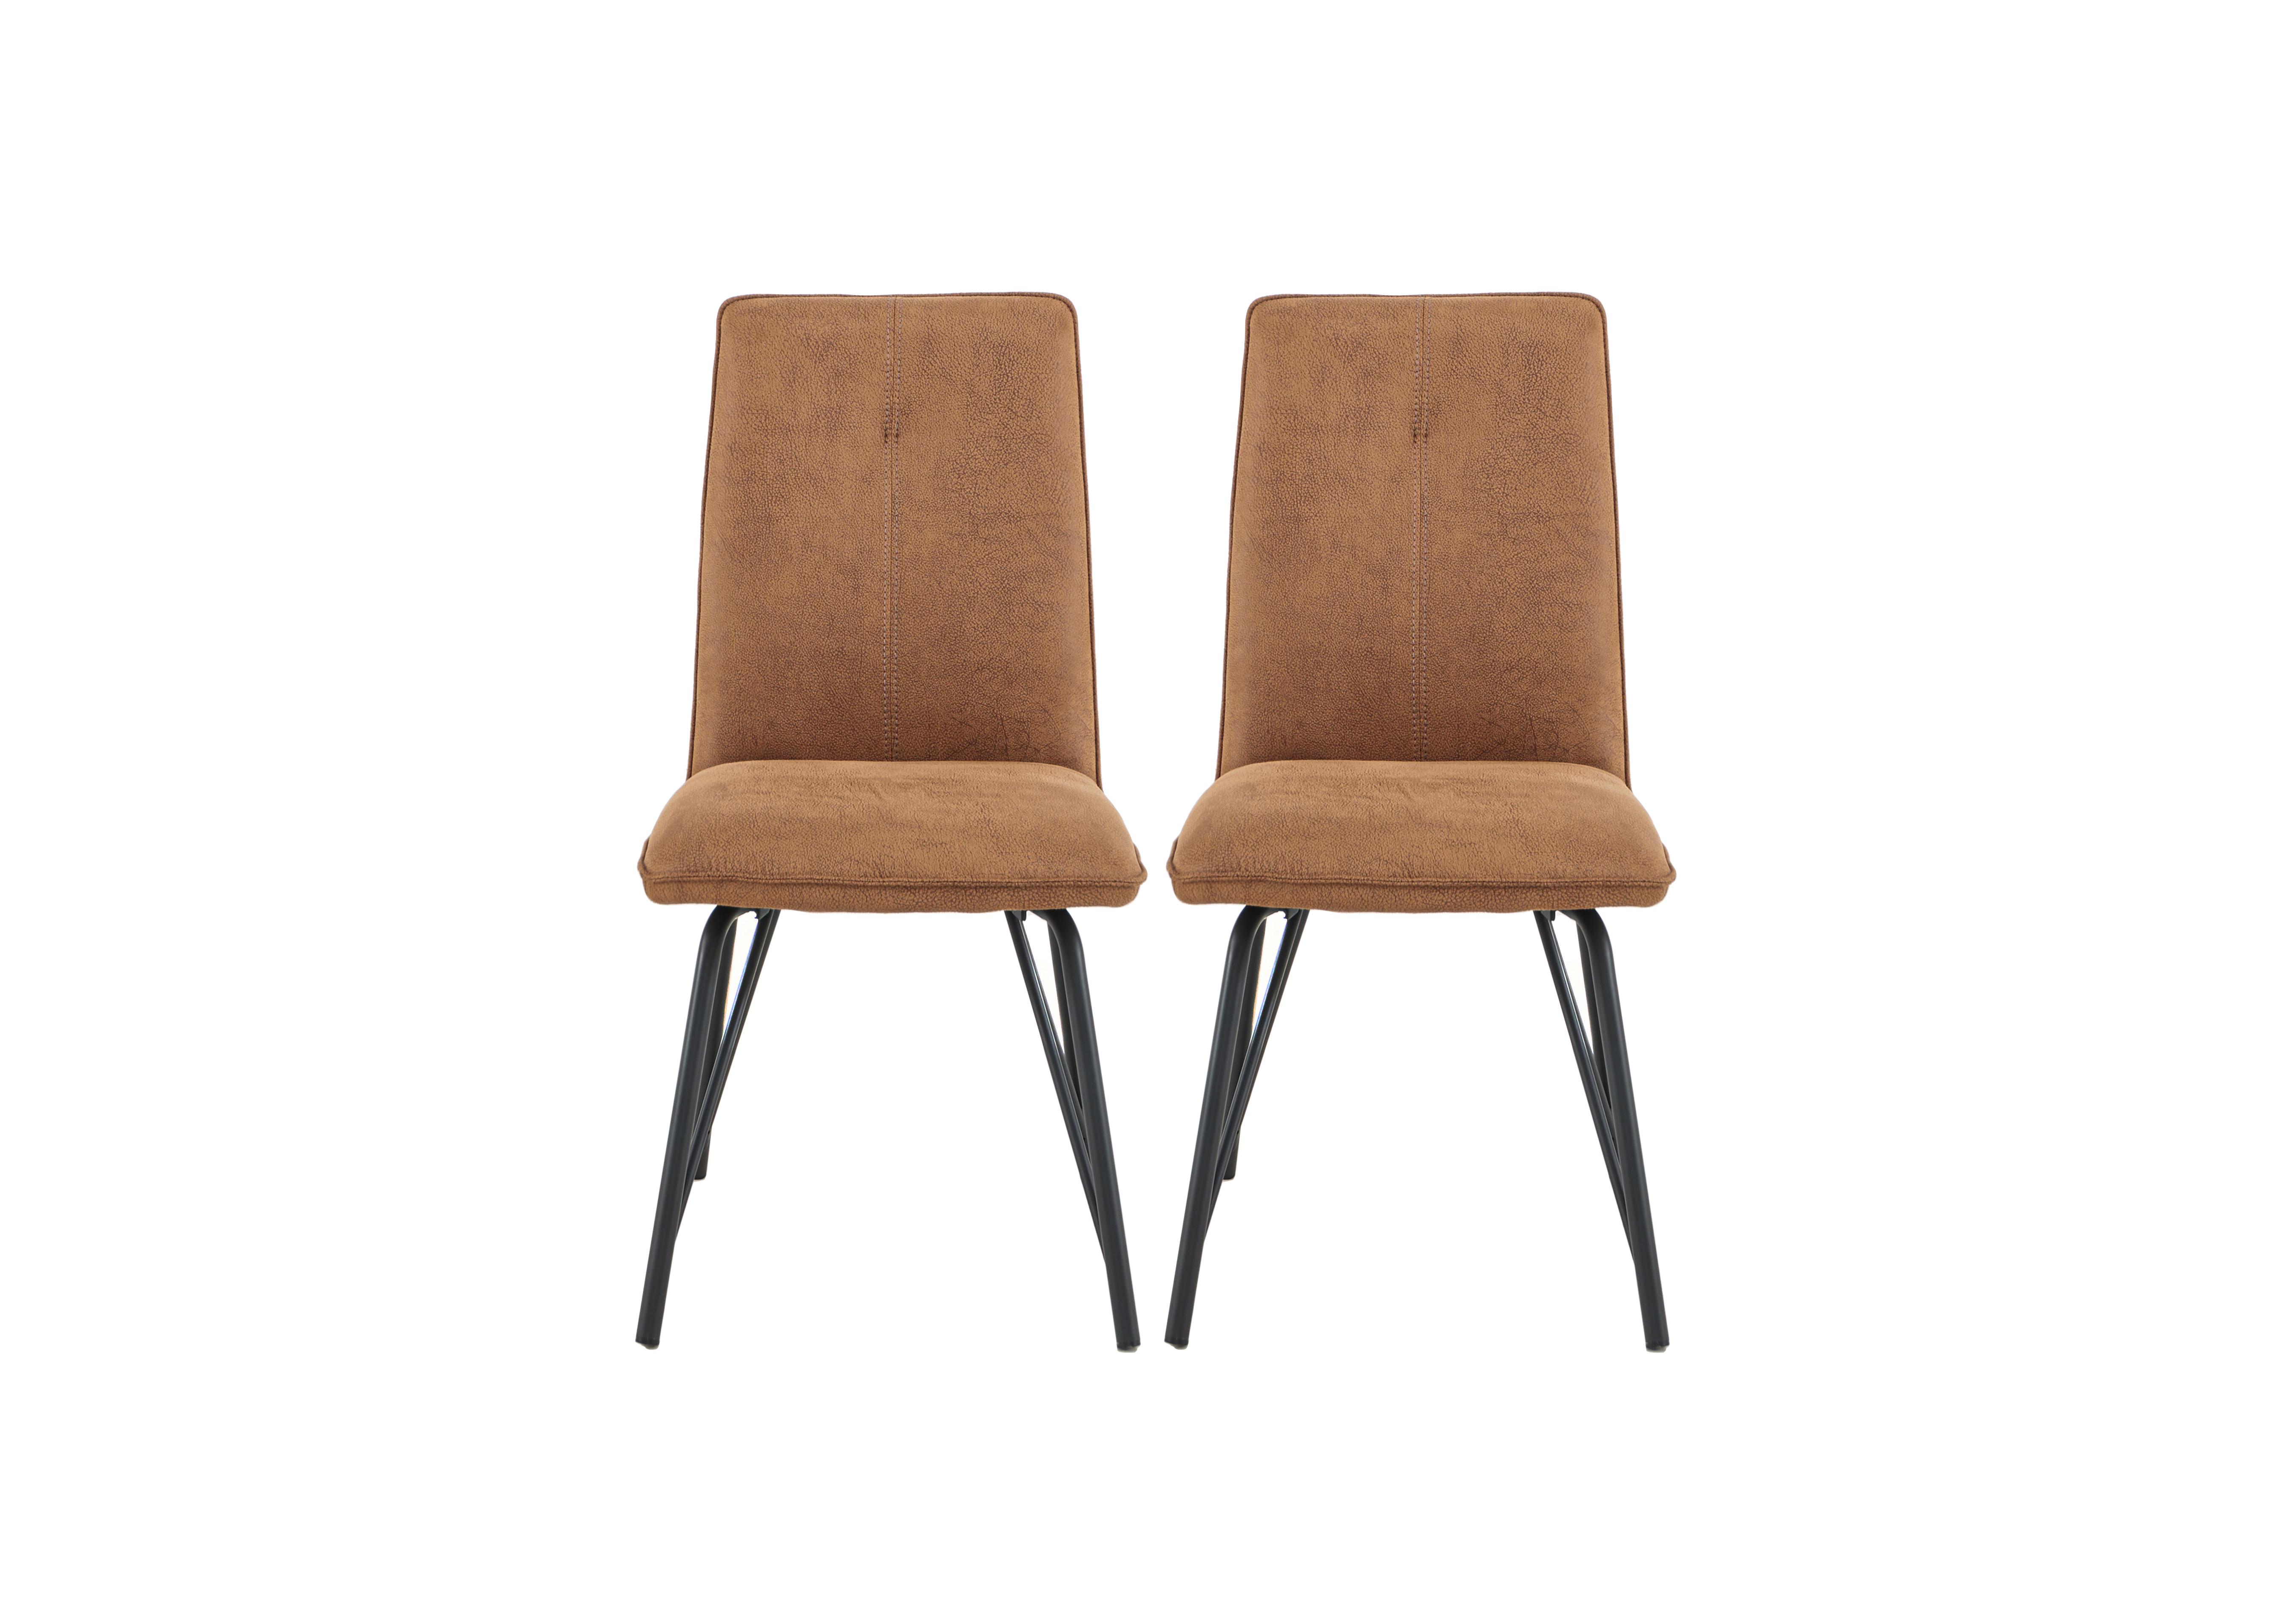 Austin Pair of Dining Chairs in Cognac on Furniture Village